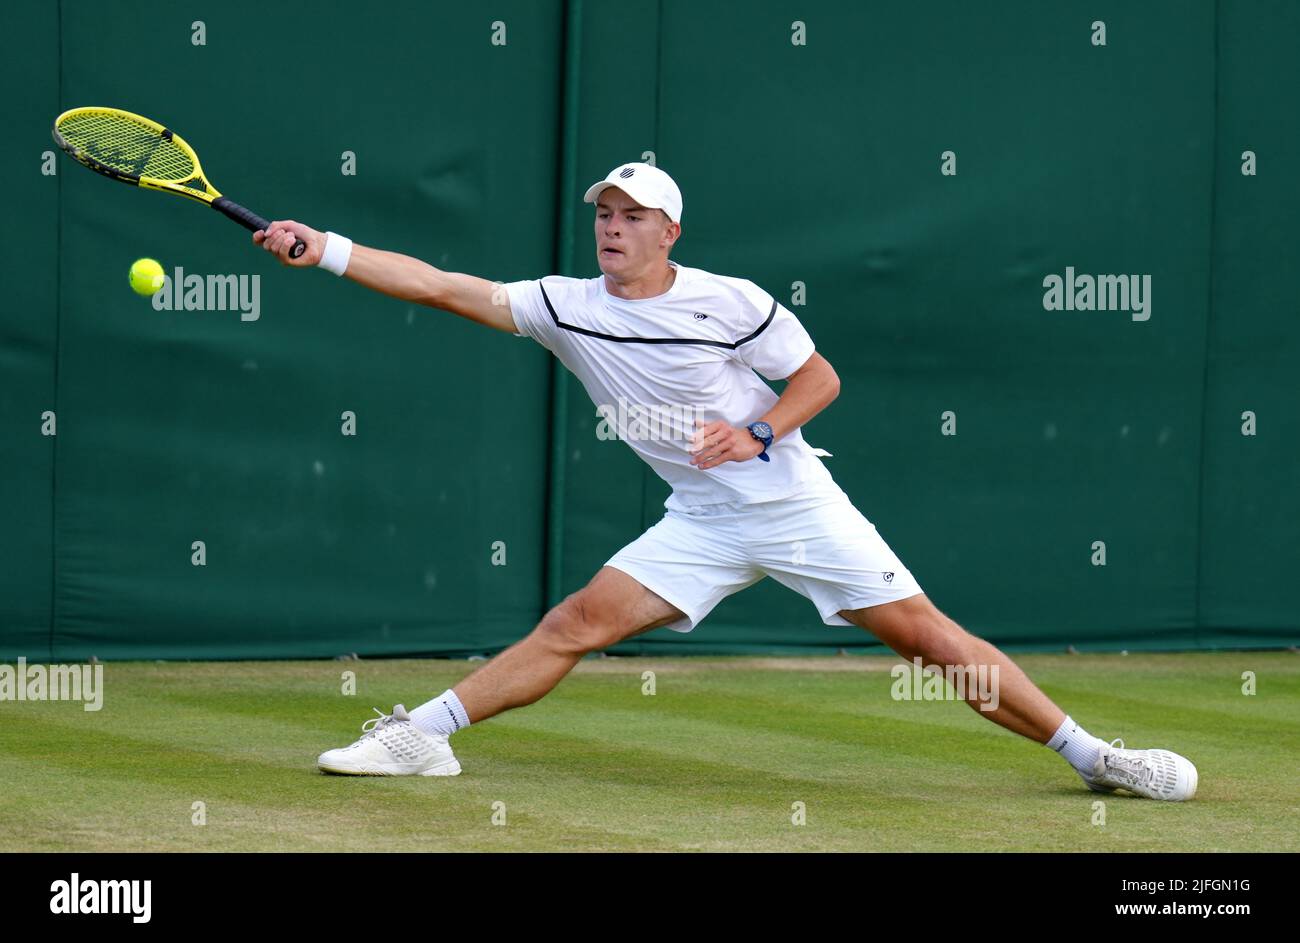 Louis Bowden in action during his Boys Singles first round match against Gabriel Debru during day seven of the 2022 Wimbledon Championships at the All England Lawn Tennis and Croquet Club, Wimbledon. Picture date: Sunday July 3, 2022. Stock Photo